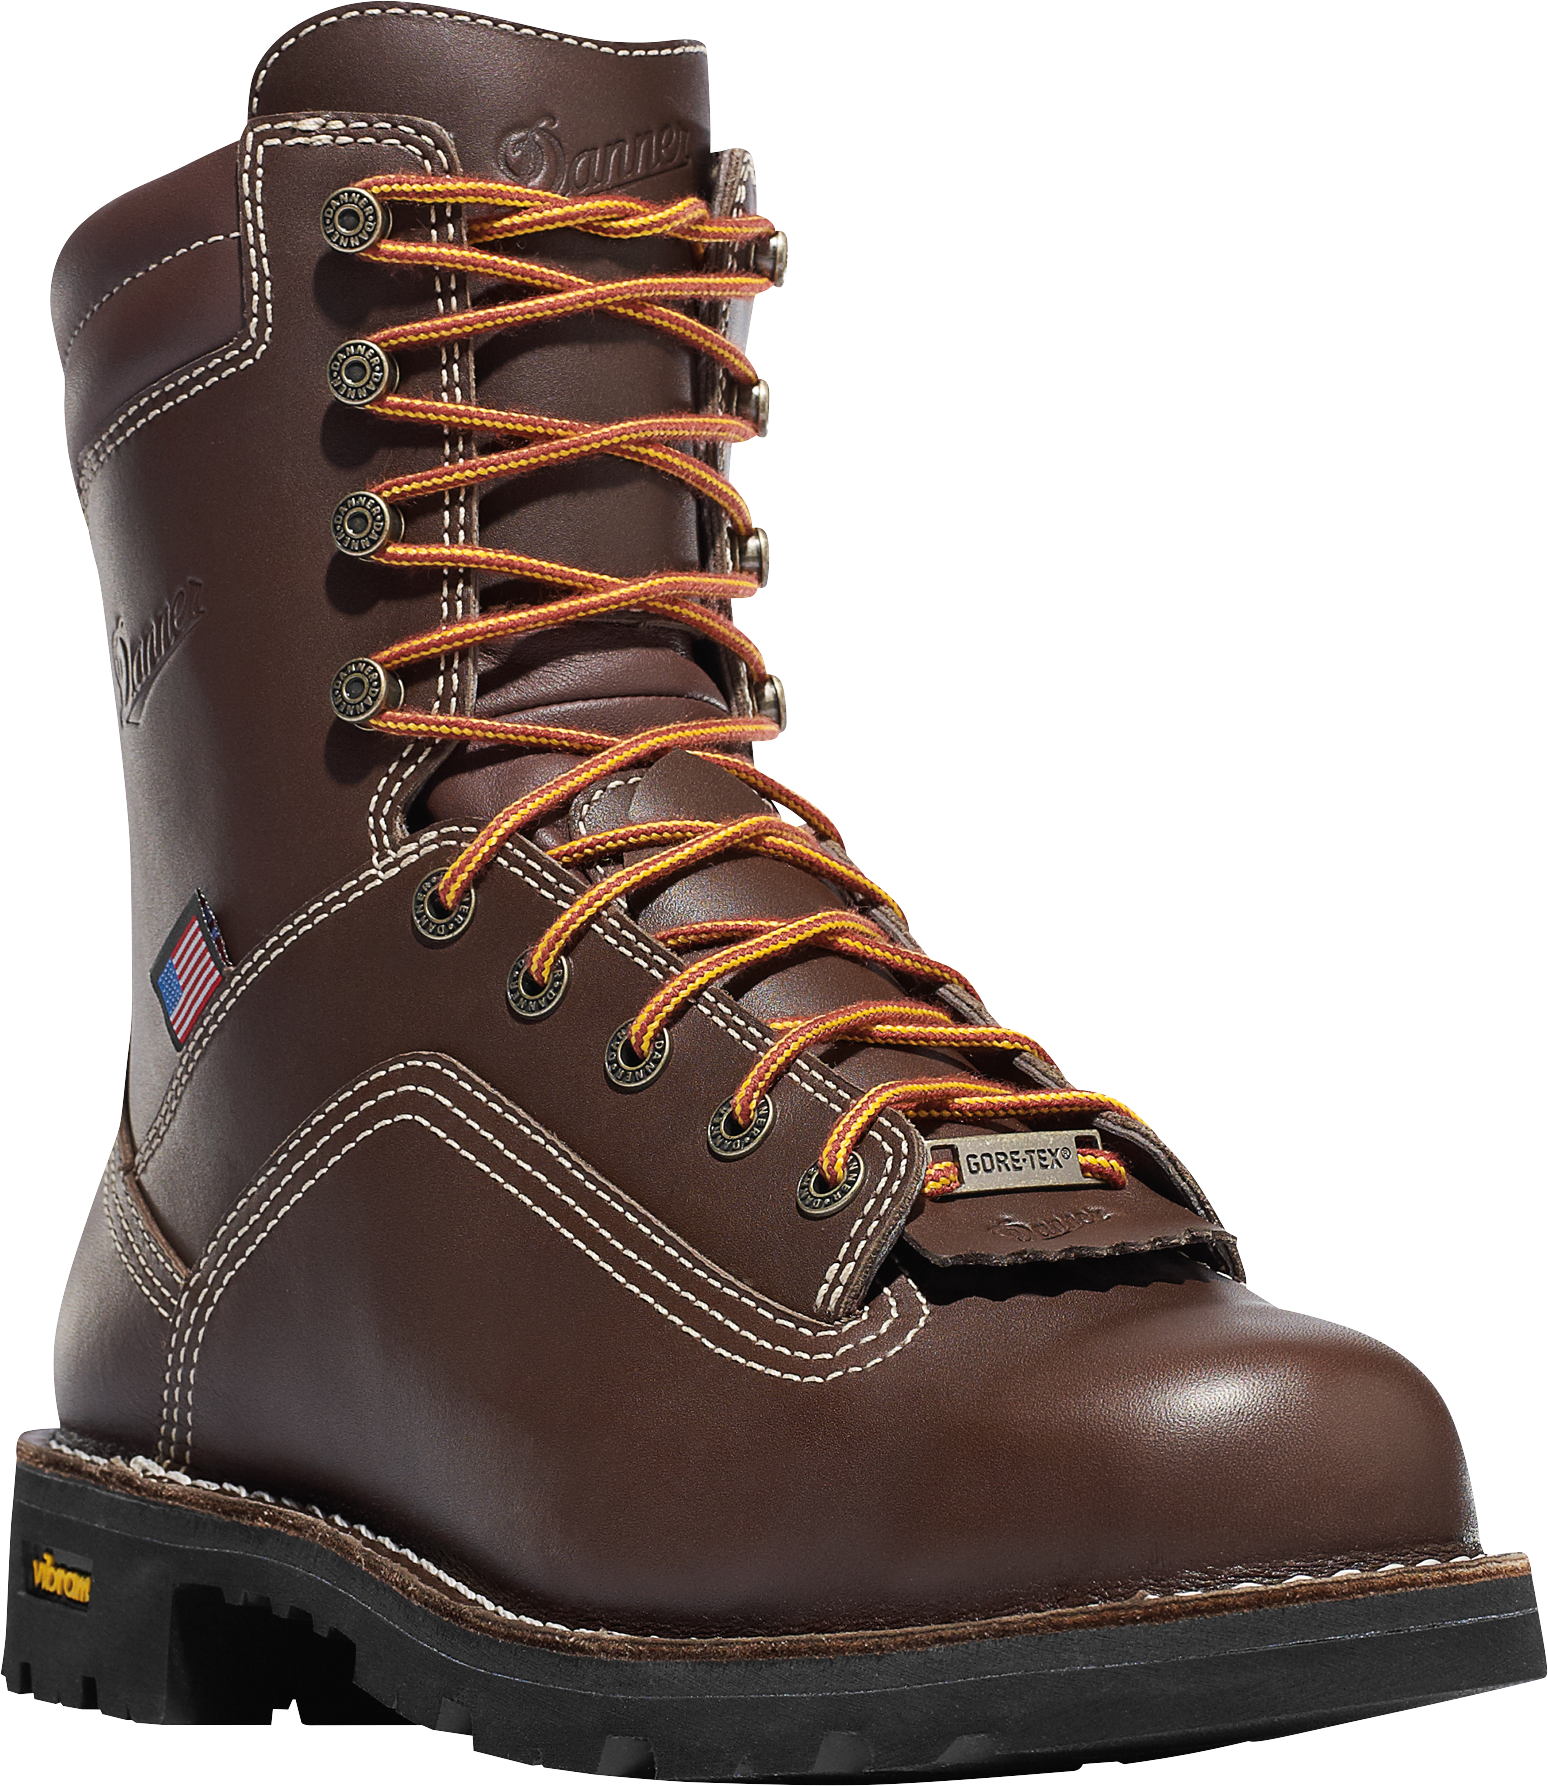 Danner Quarry USA Brown GORE-TEX Alloy Toe Work Boots for Men - Brown - 10.5W